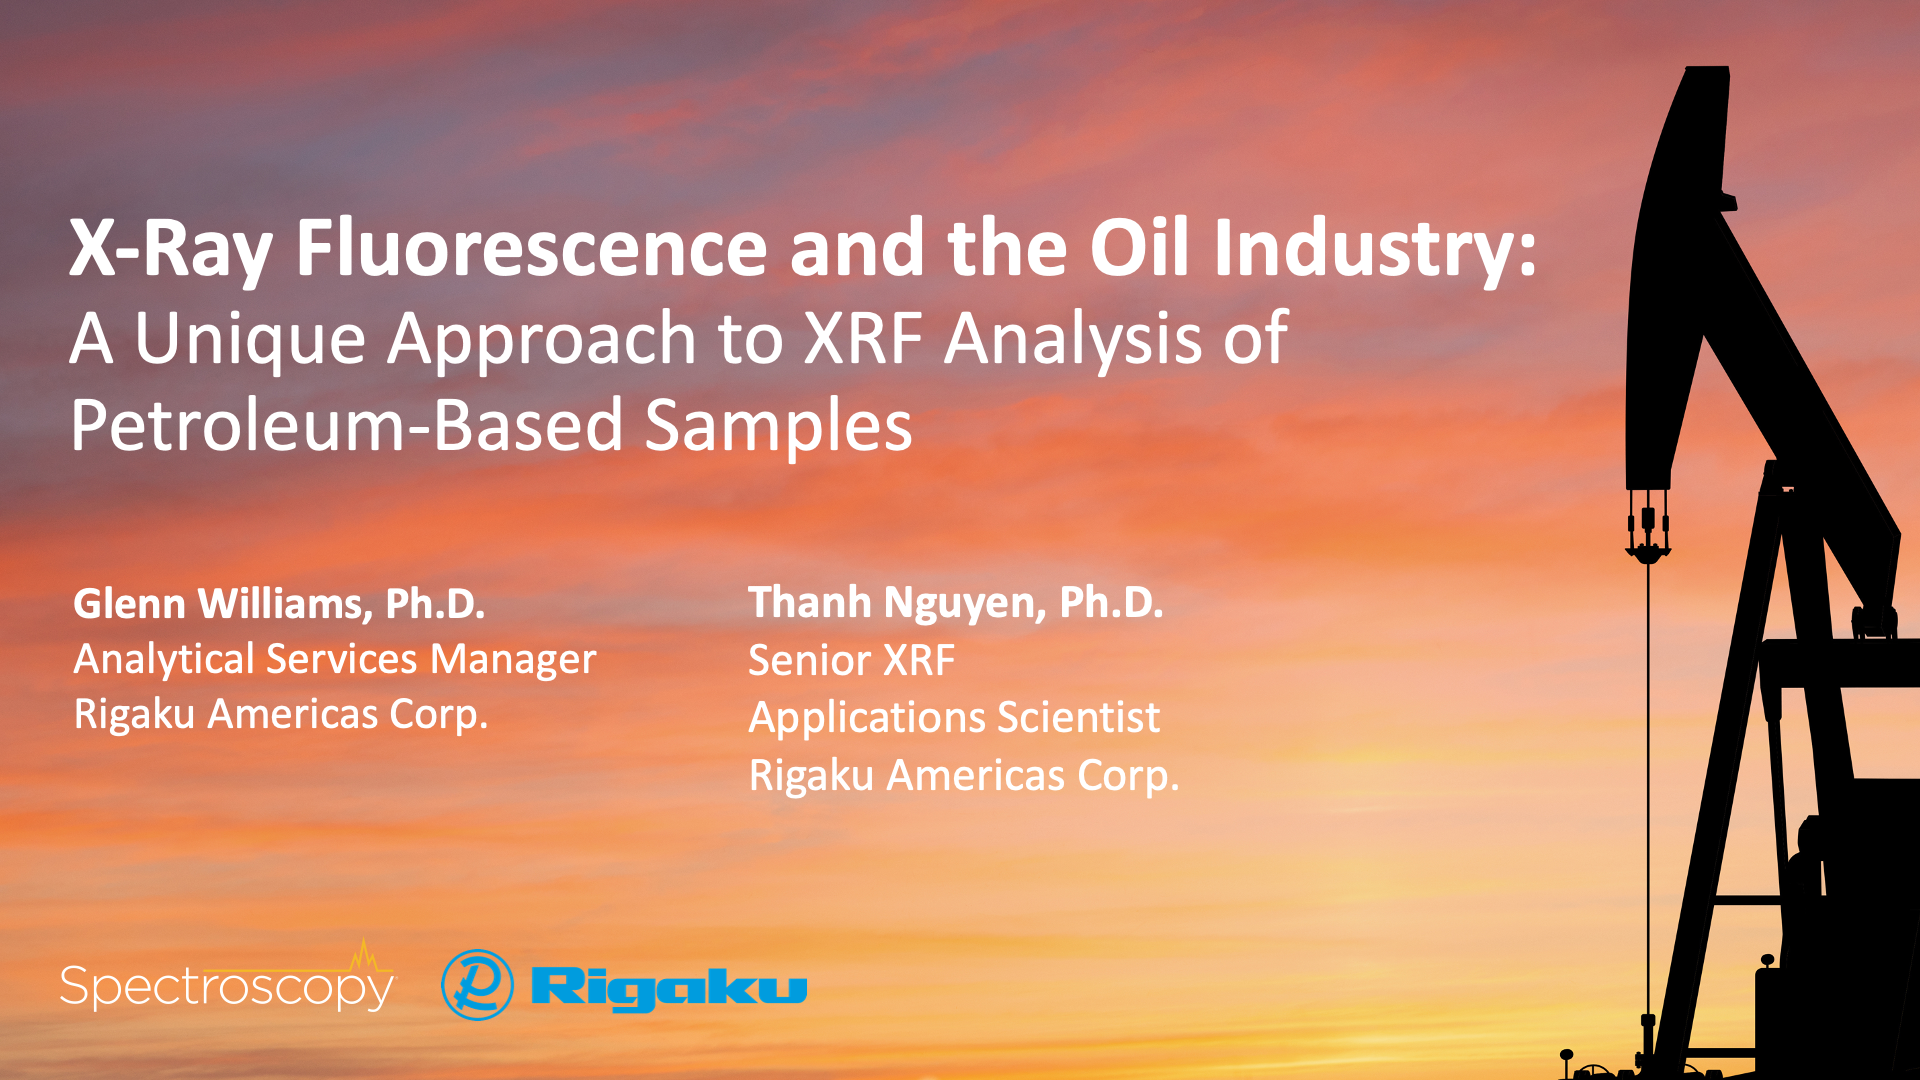 X-Ray Fluorescence and the Oil Industry: A Unique Approach to XRF Analysis of Petroleum-Based Samples